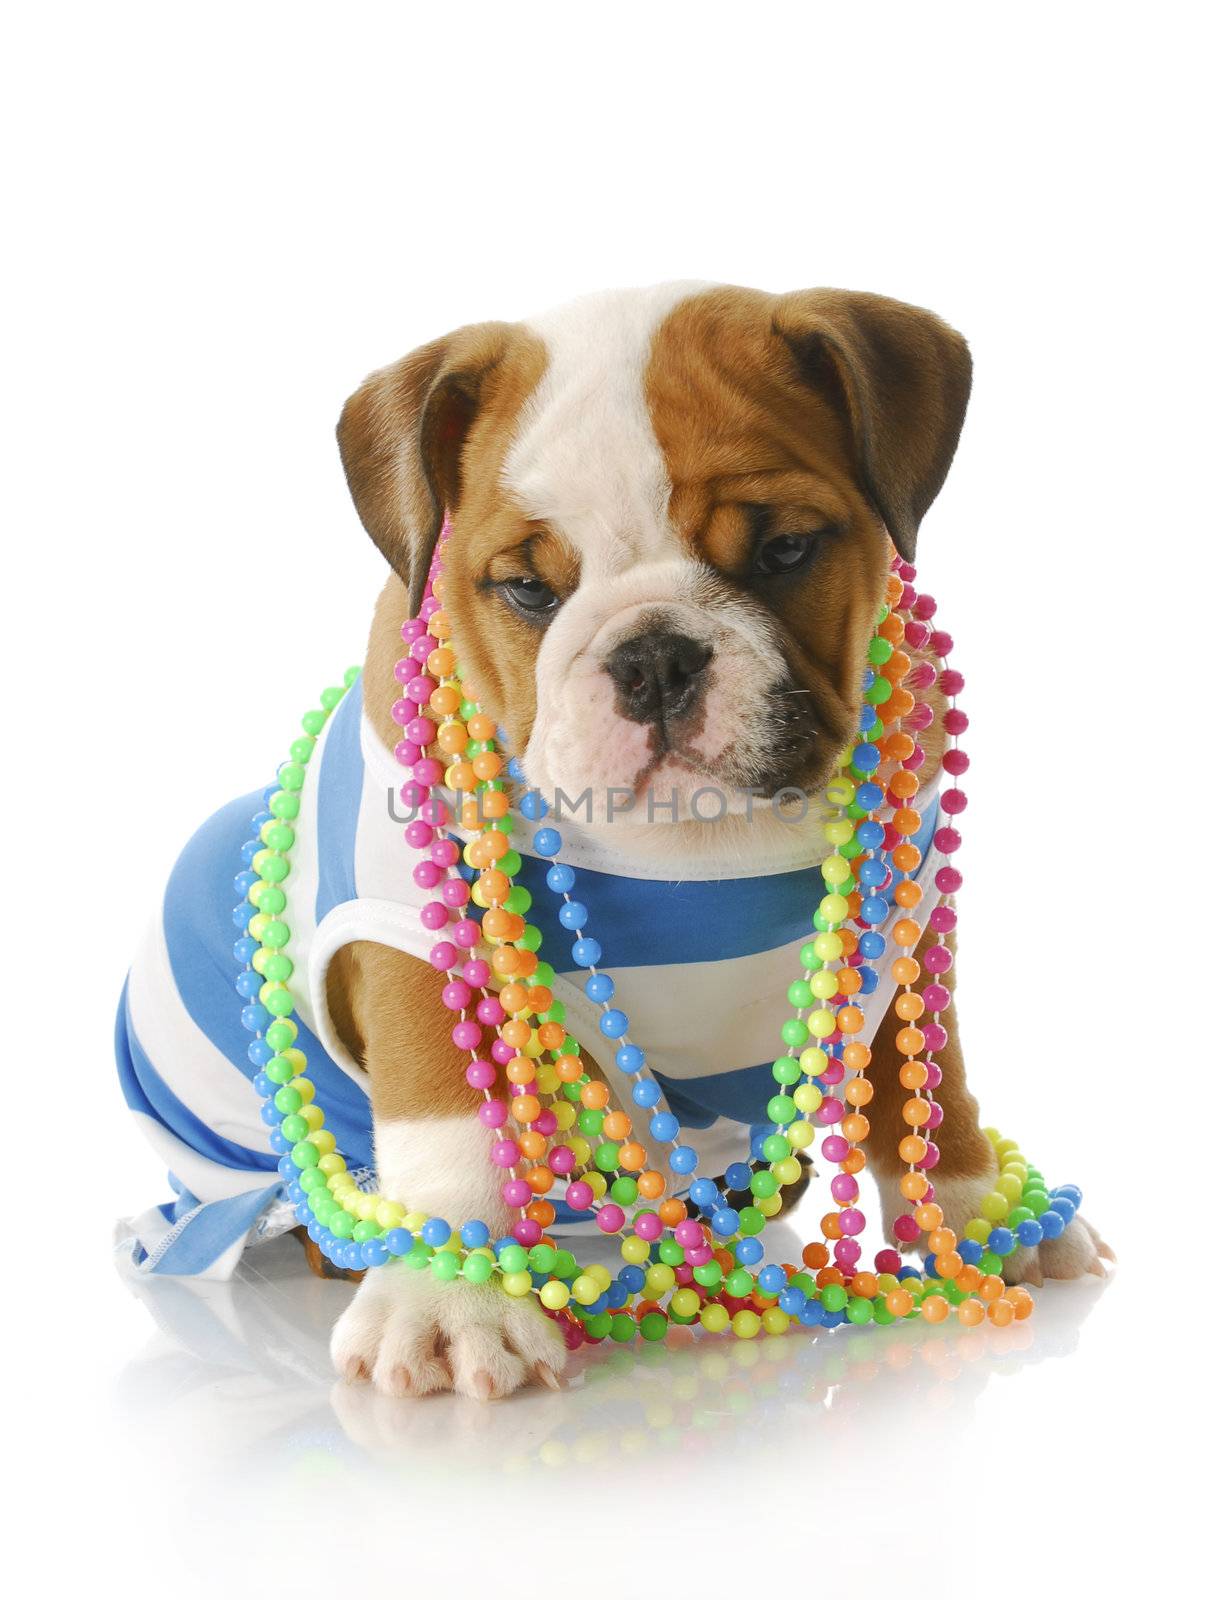 adorable eight week old english bulldog puppy wearing blue and white shirt with colorful jewelery with reflection on white background